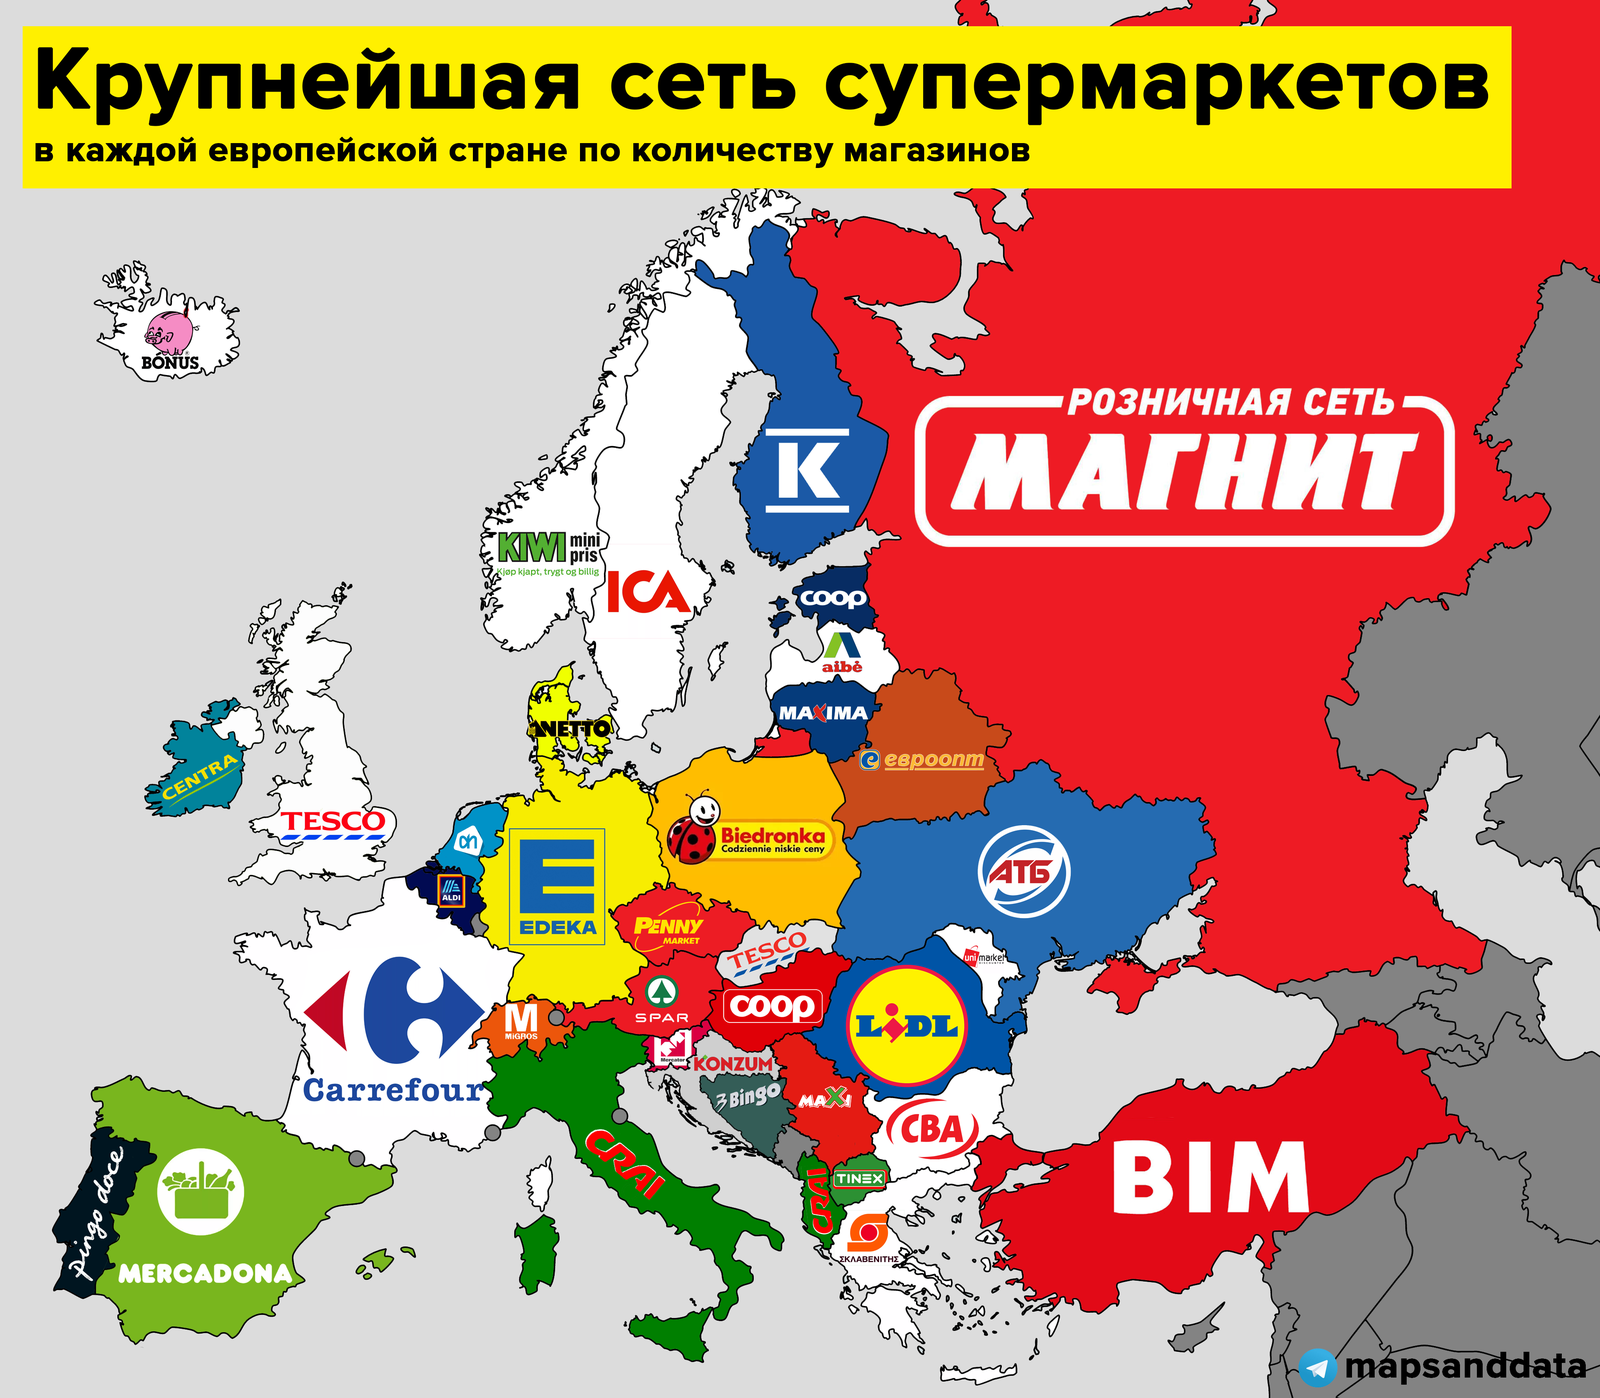 Magnet on the map of Europe - My, Magnet, VTB Bank, Europe, Infographics, Cards, Russia, Pyaterochka, Dixie